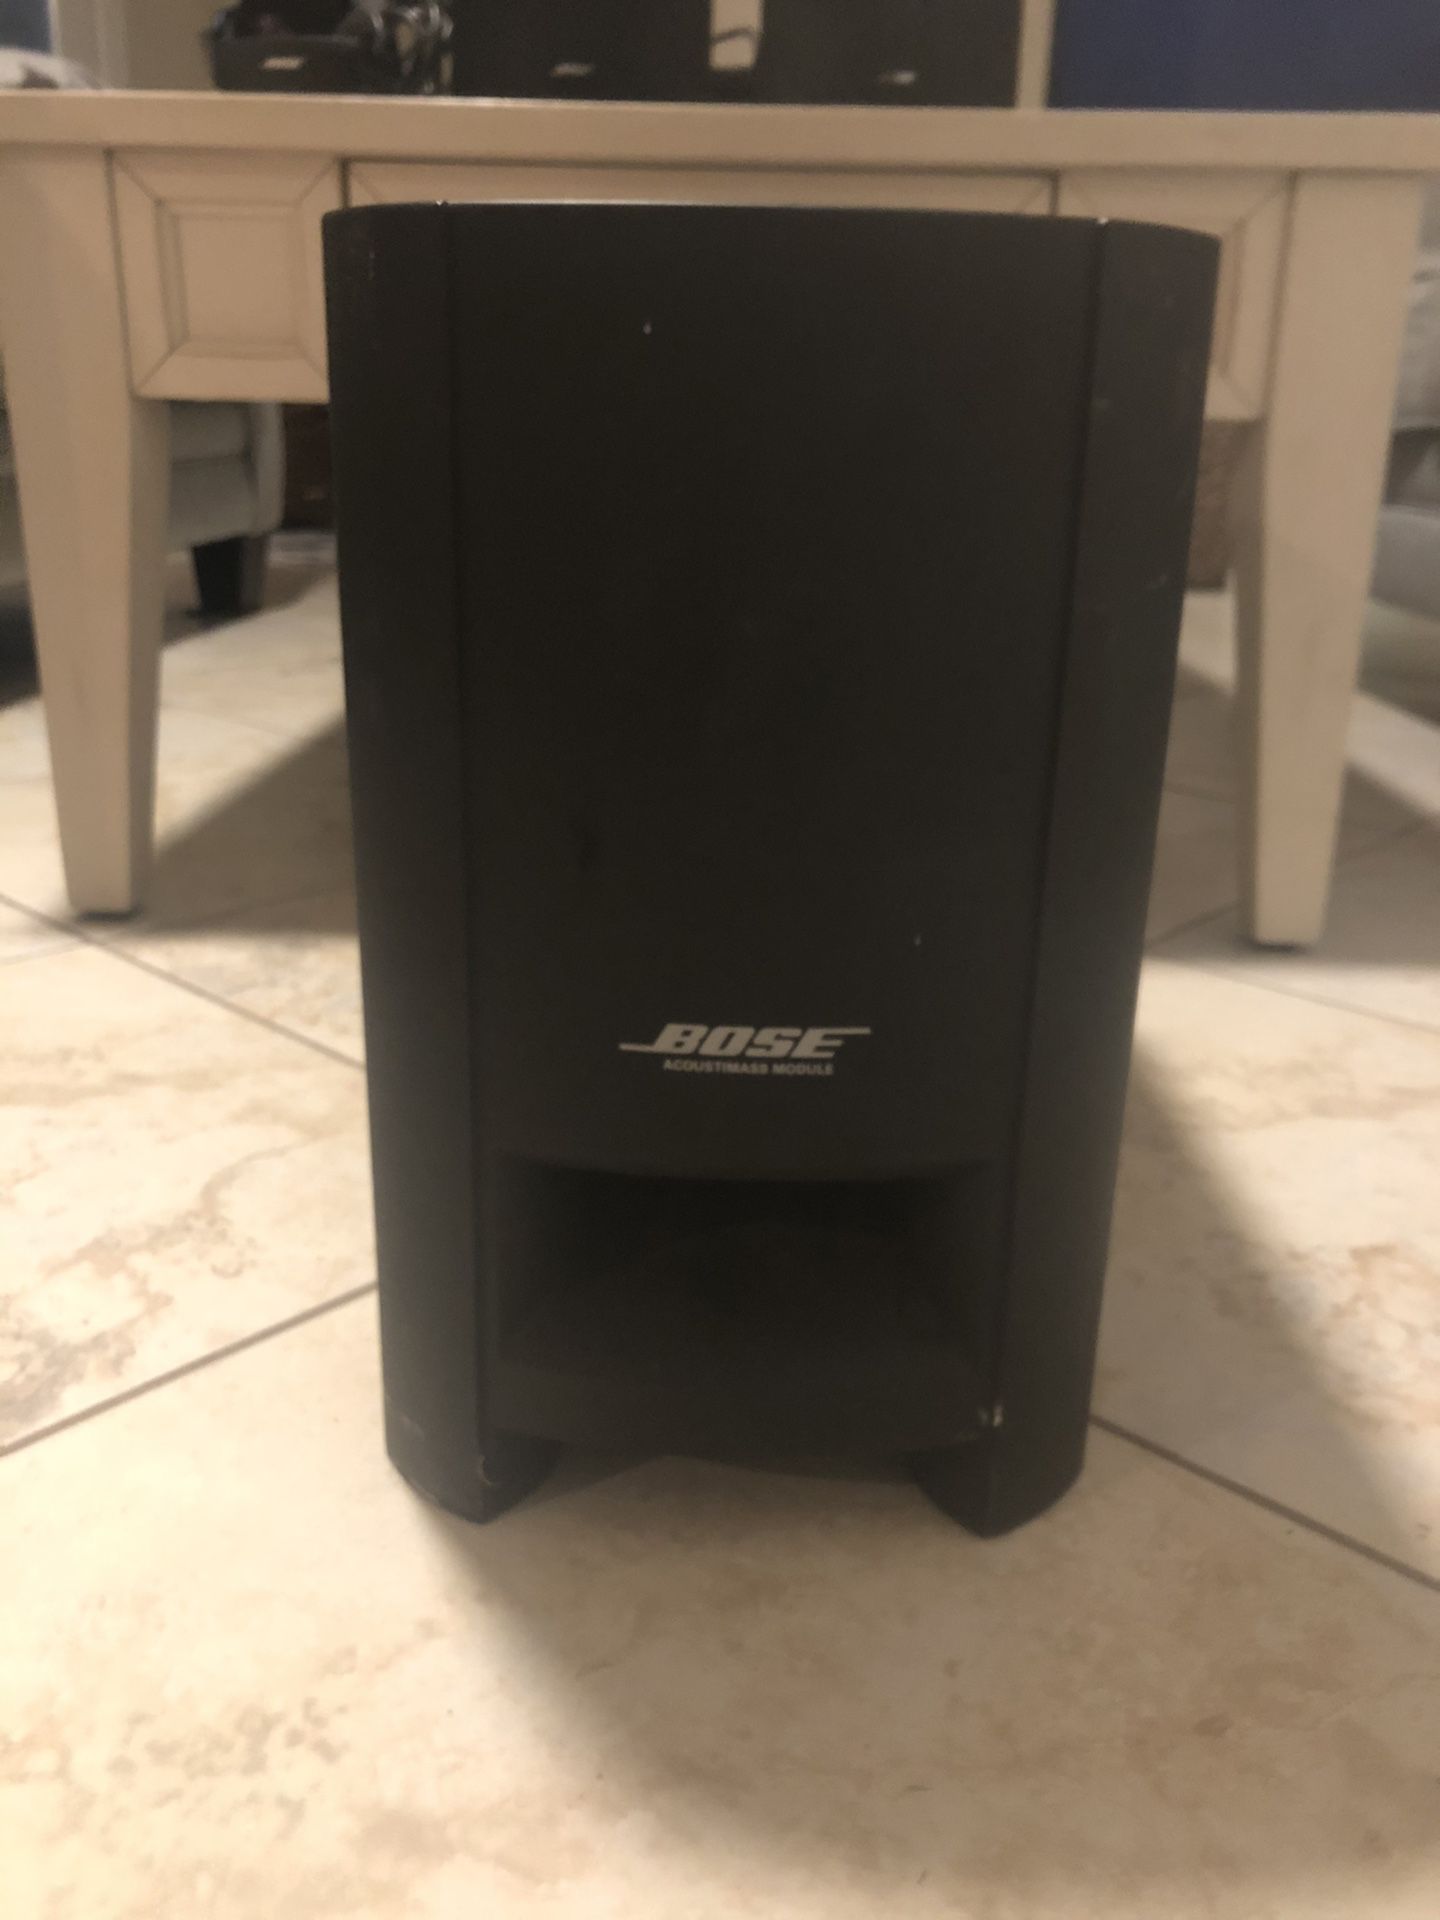 BOSE Cinemate GS ll digital home theater system